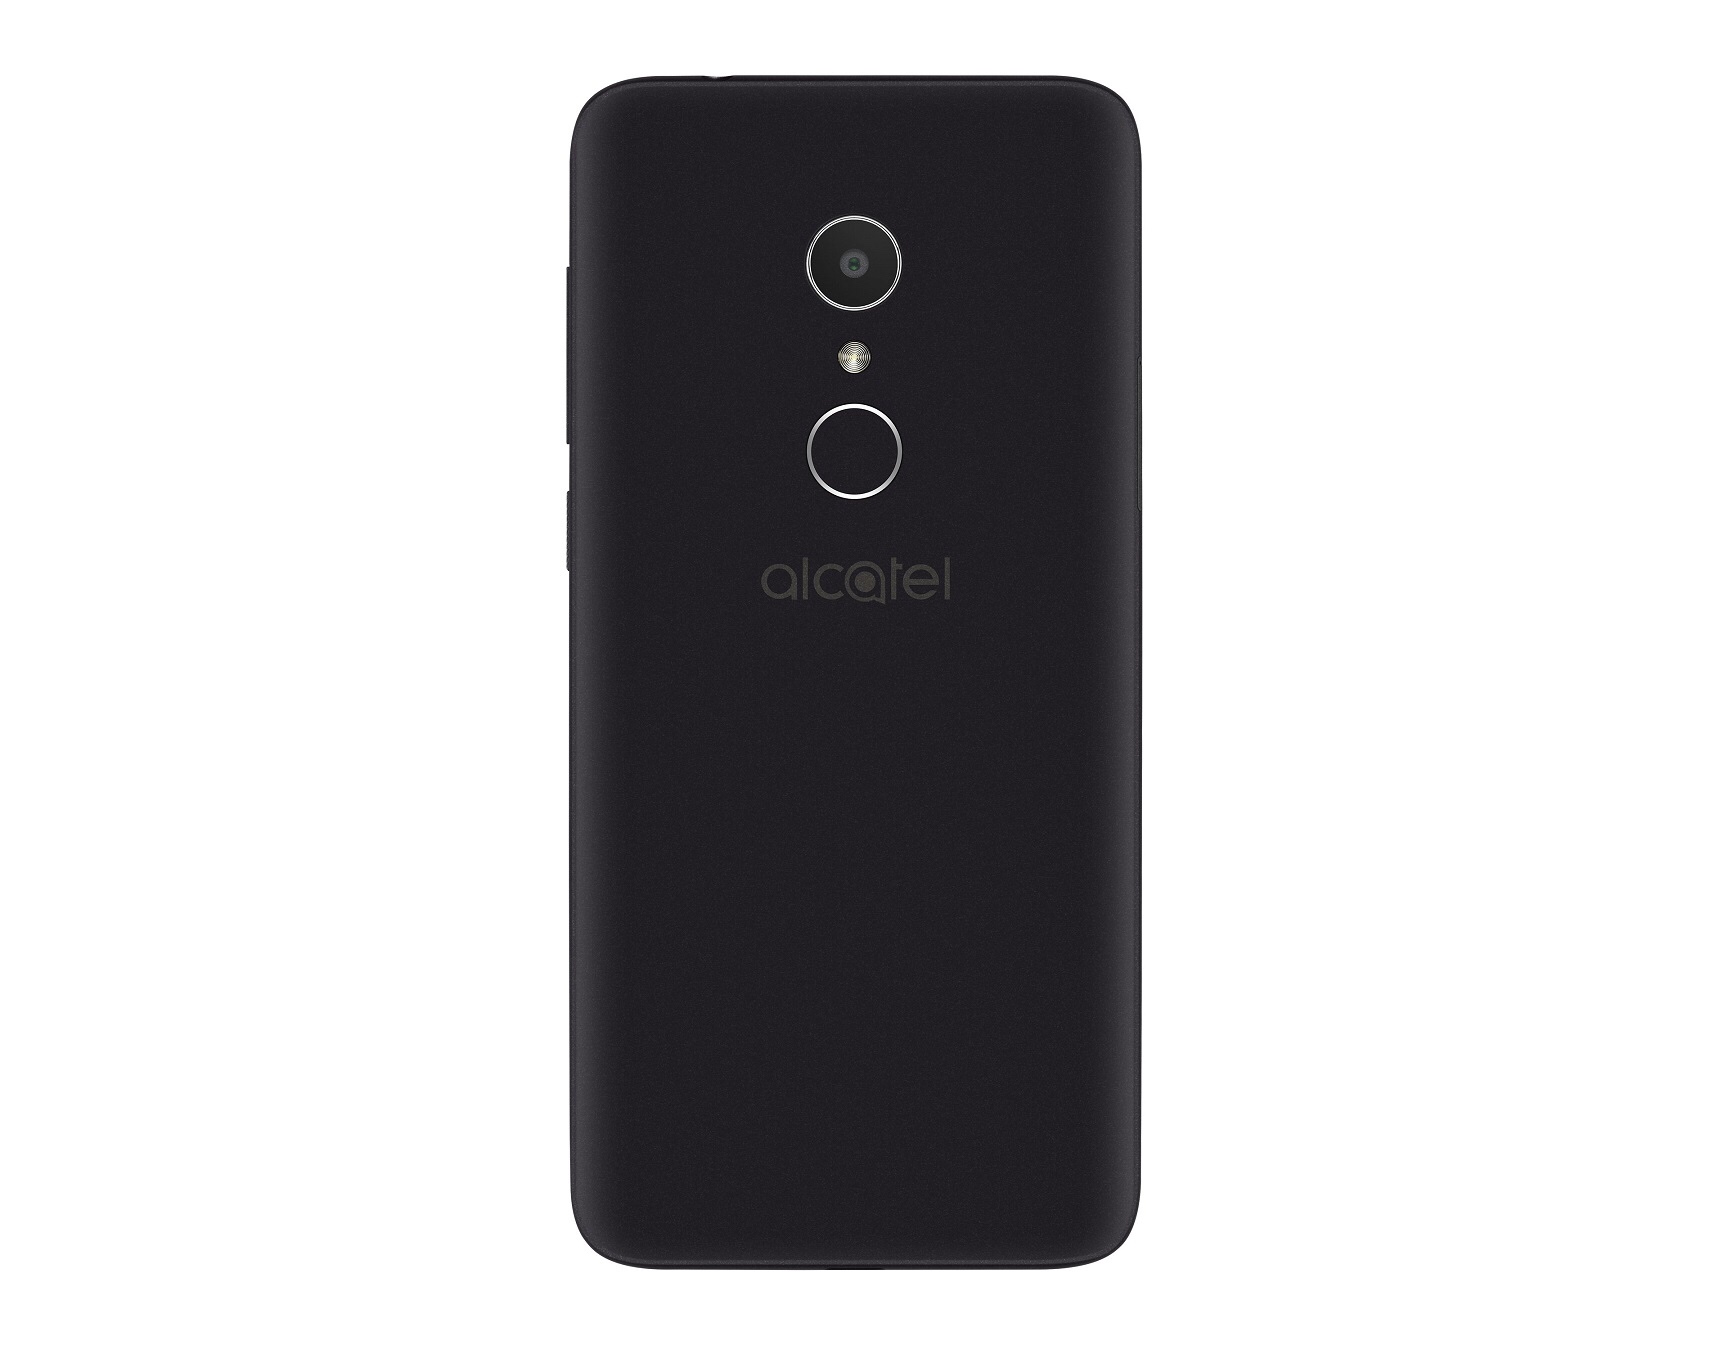 Alcatel’s Android Go phone is on the way to US for under $100